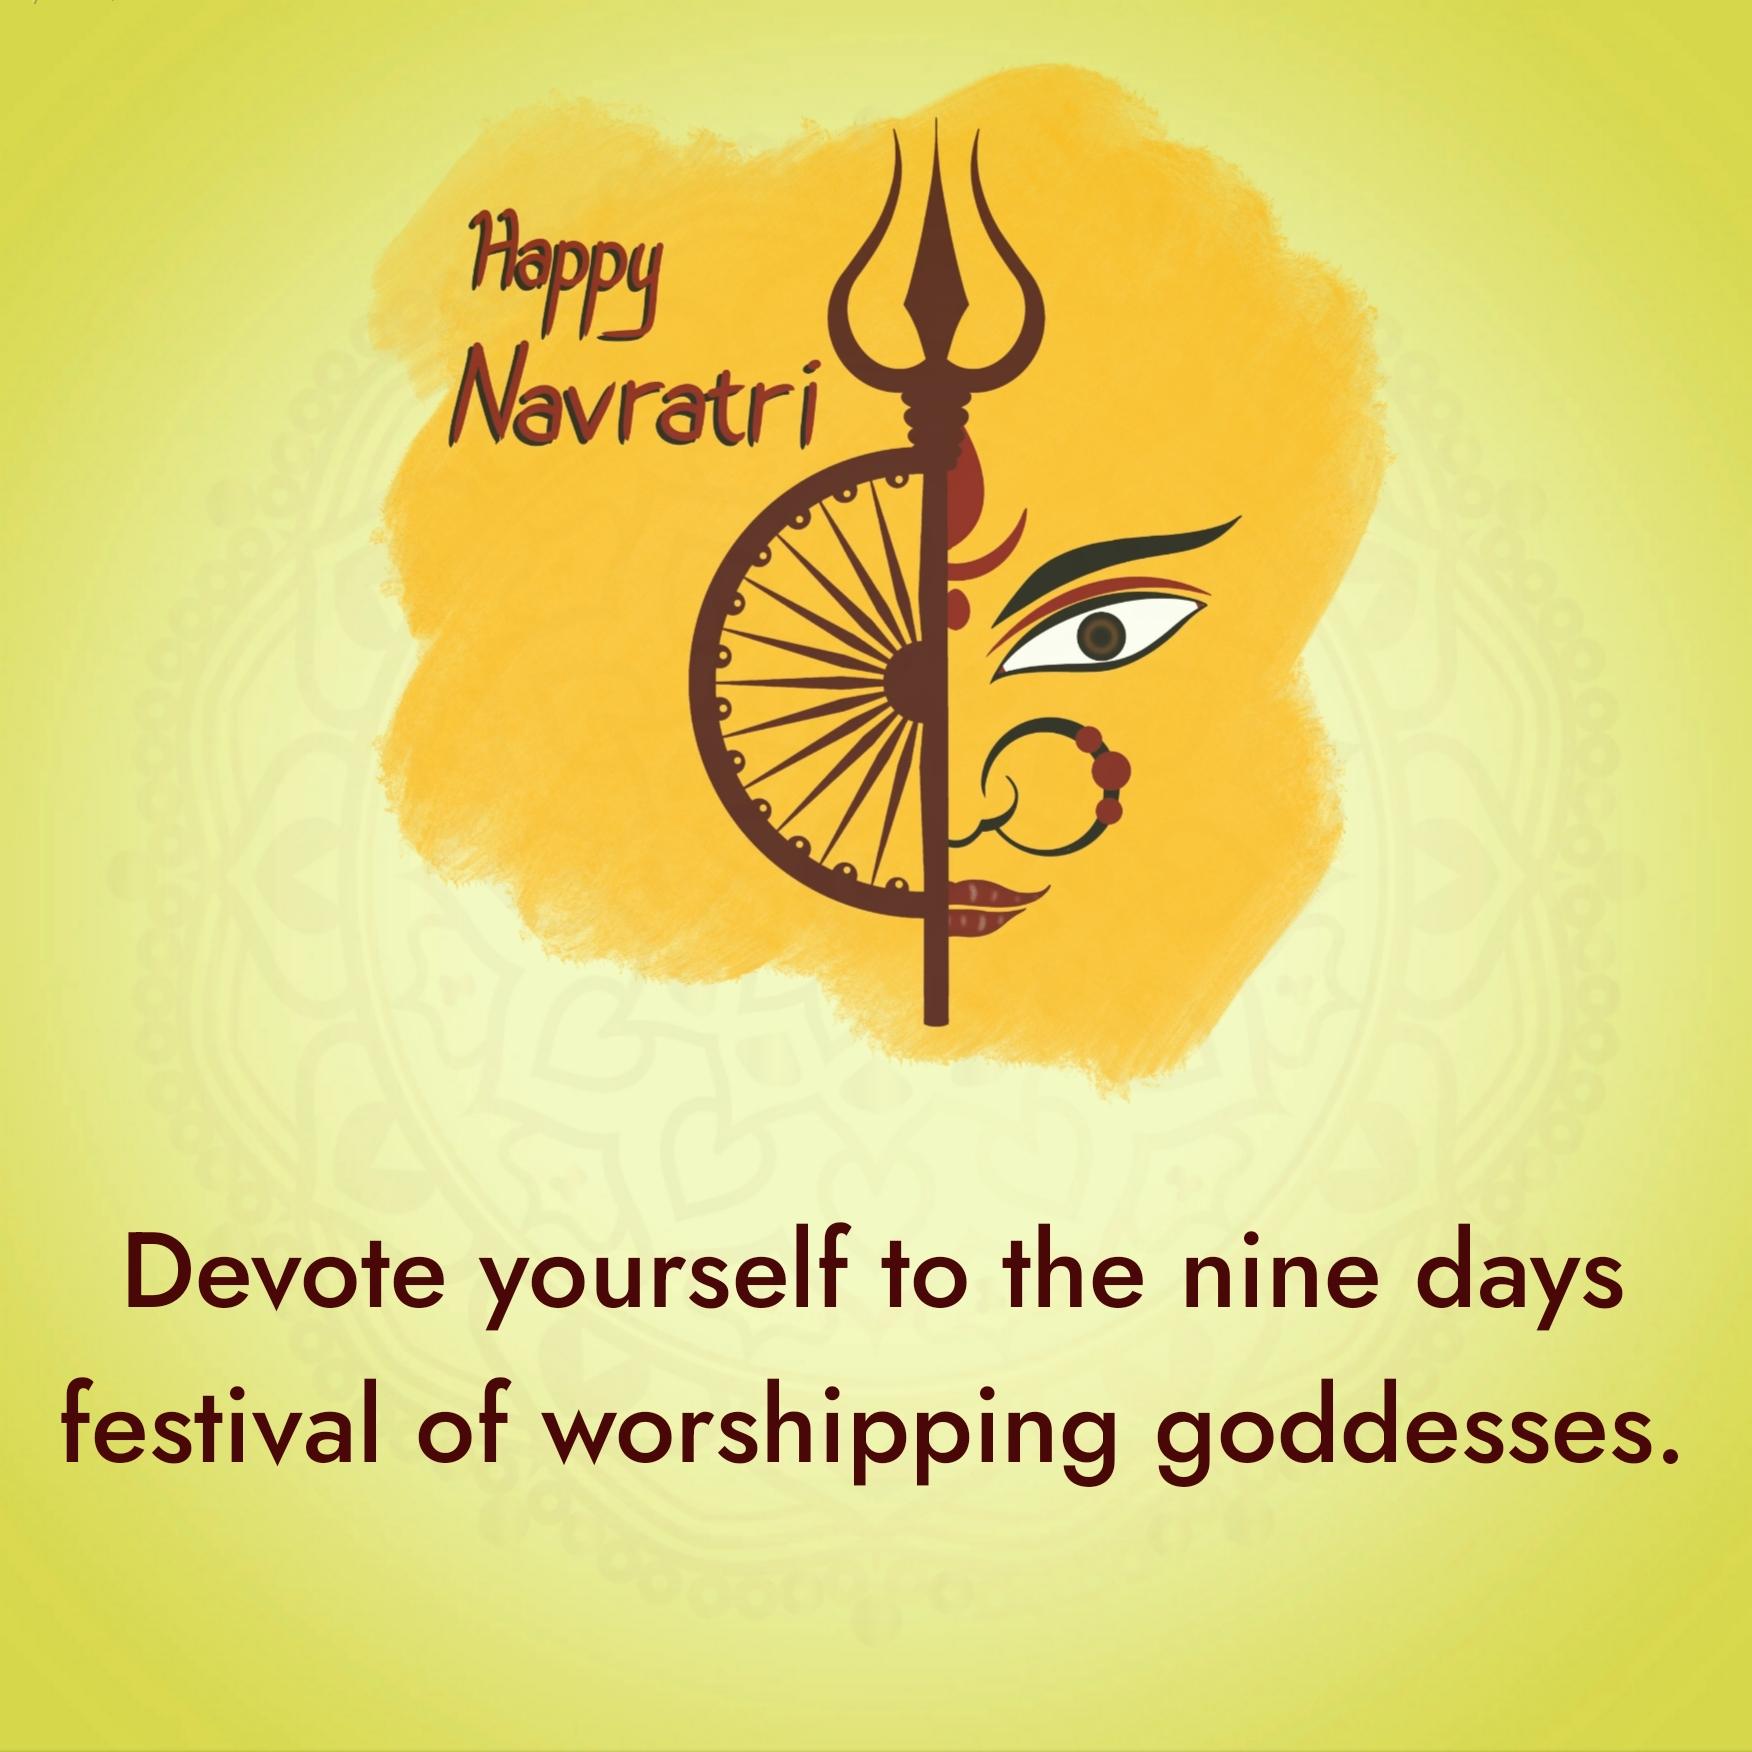 Devote yourself to the nine days festival of worshipping goddesses